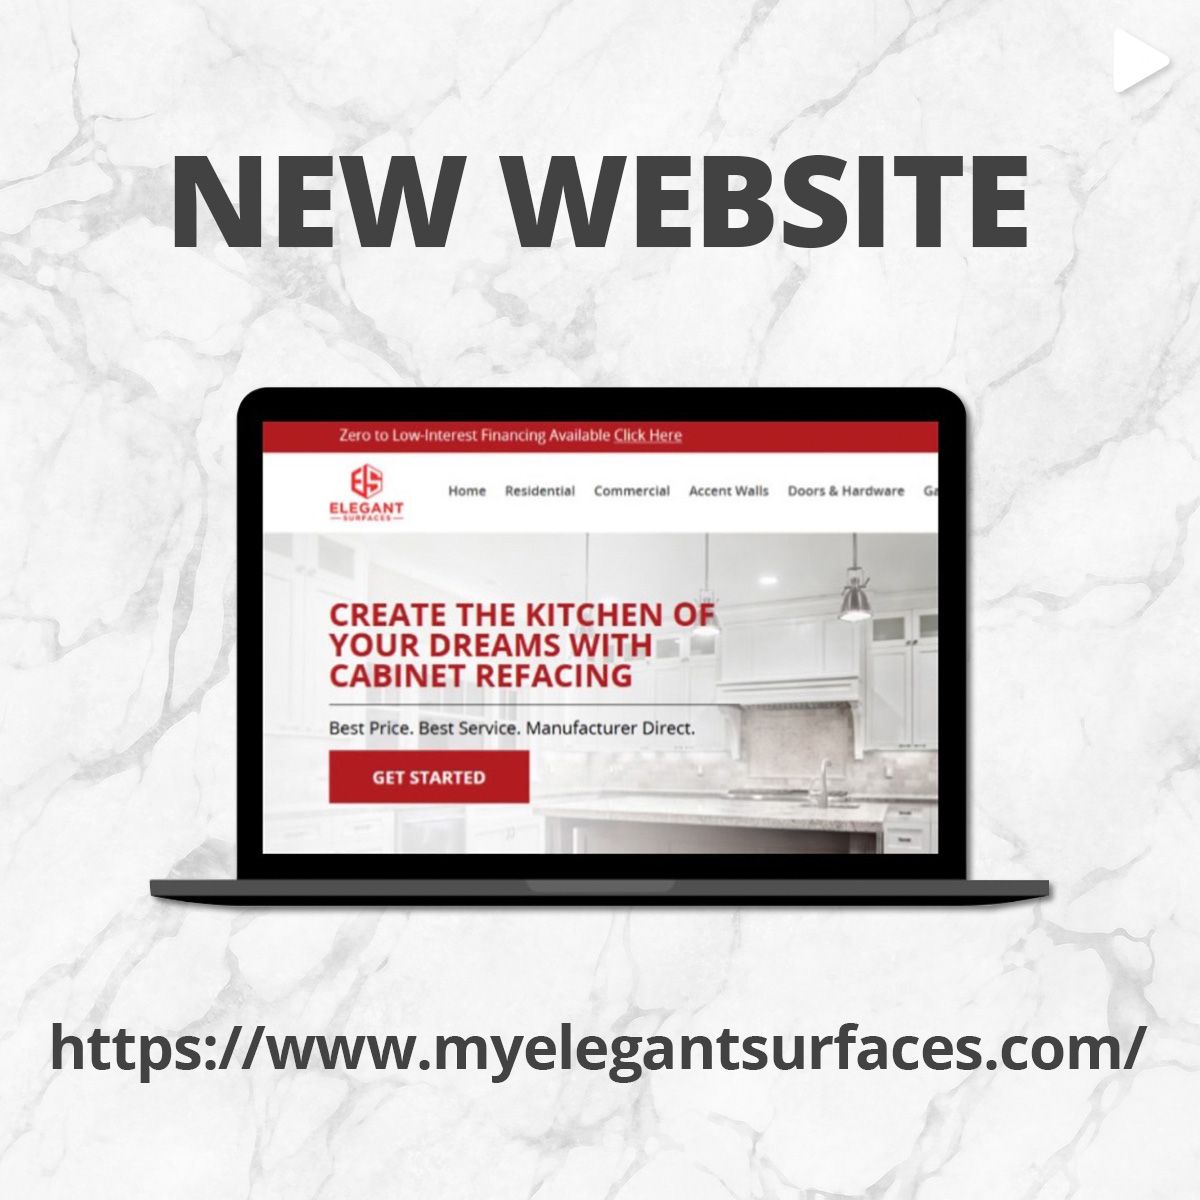 Elegant Surfaces Responds To Increased User Demand Launching New Website With Enhanced Digital Presence